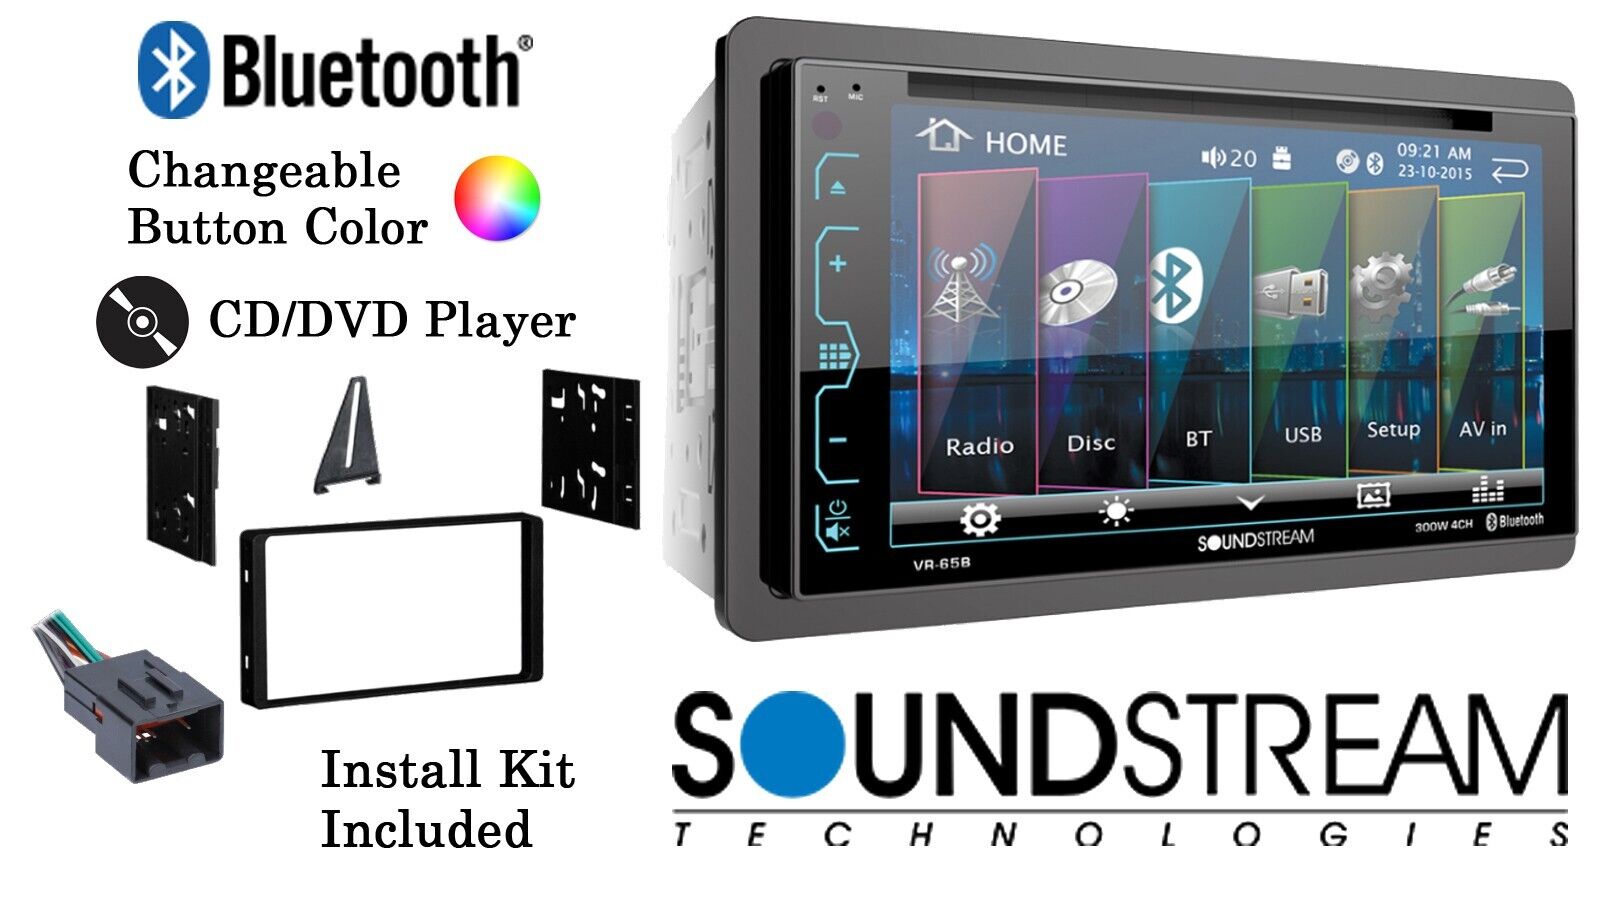 New Soundstream Double DIN Touchscreen CD/DVD Car Stereo W/ Complete Install Kit